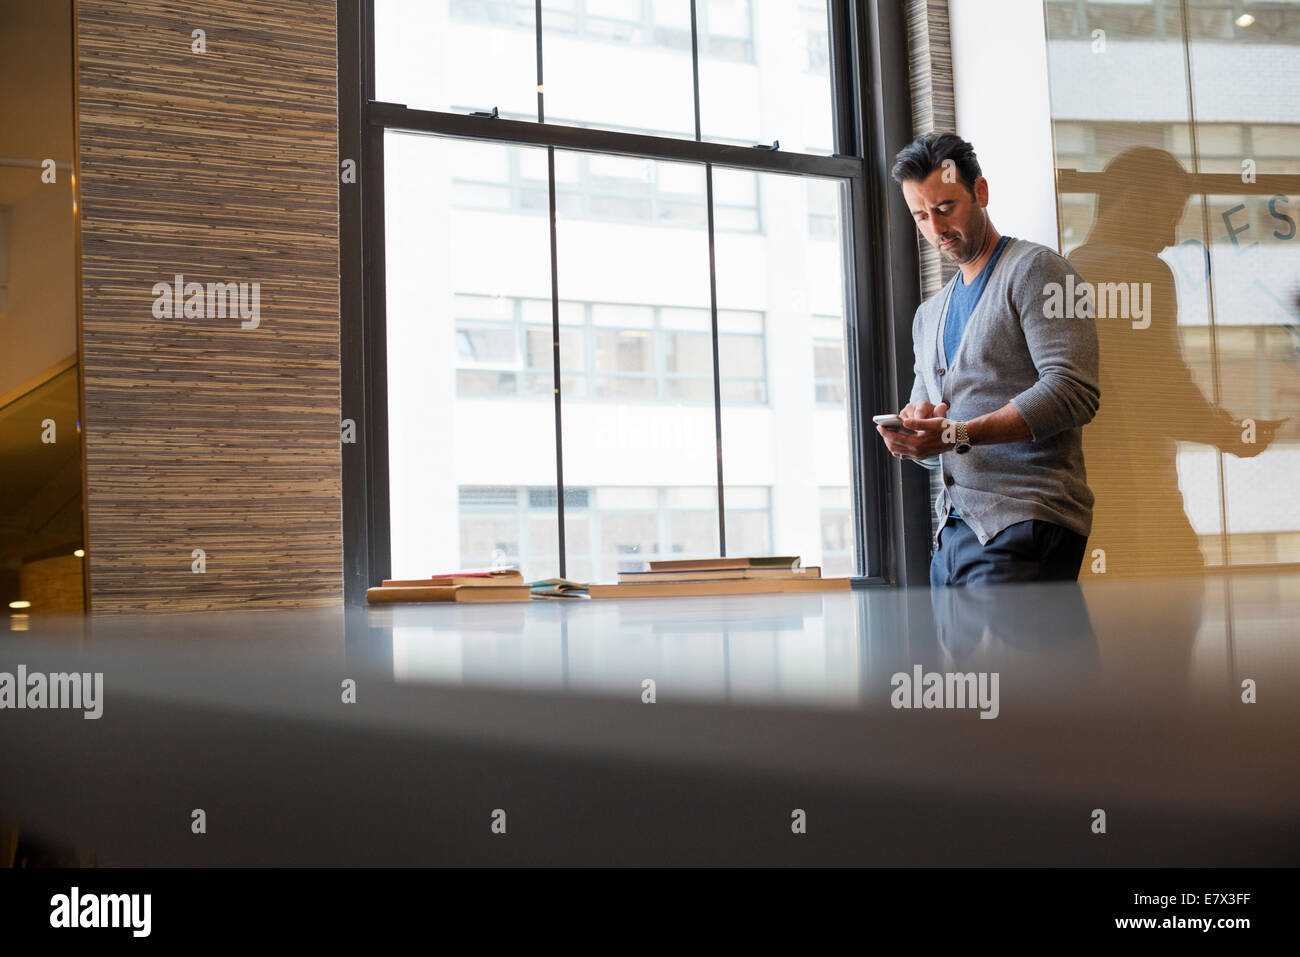 Office life. A man standing by a window in an office checking his smart phone. Stock Photo